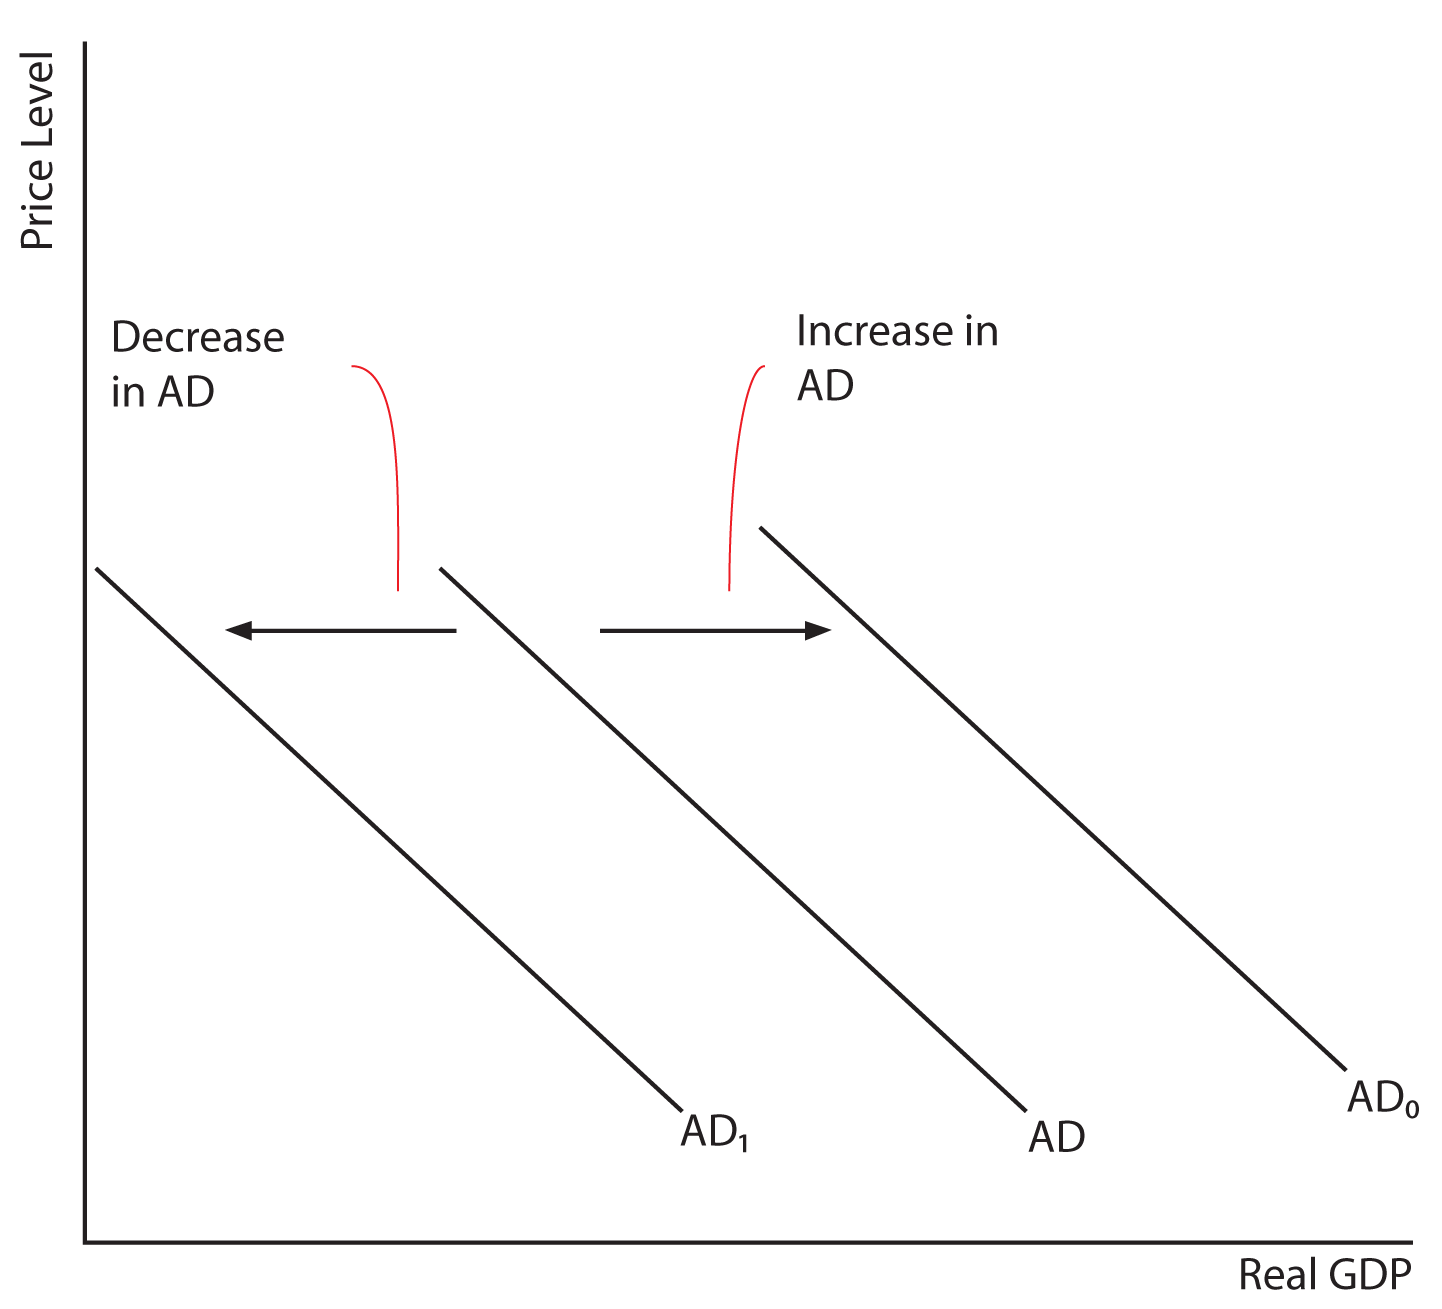 Image 8.02: The image shows a graph. The y axis is labeled Price Level. The x axis is labeled Real GDP. There are three lines drawn with the same negative slope. The middle line is labeled AD. There is a line drawn to show the shift of the line, and the arrow is labeled Increase in AD. The arrow points to a line on the right labeled AD subscript 0. Likewise an arrow is drawn to the left labeled Decrease in AD. It points to the line on the left which is labeled AD subscript 1.